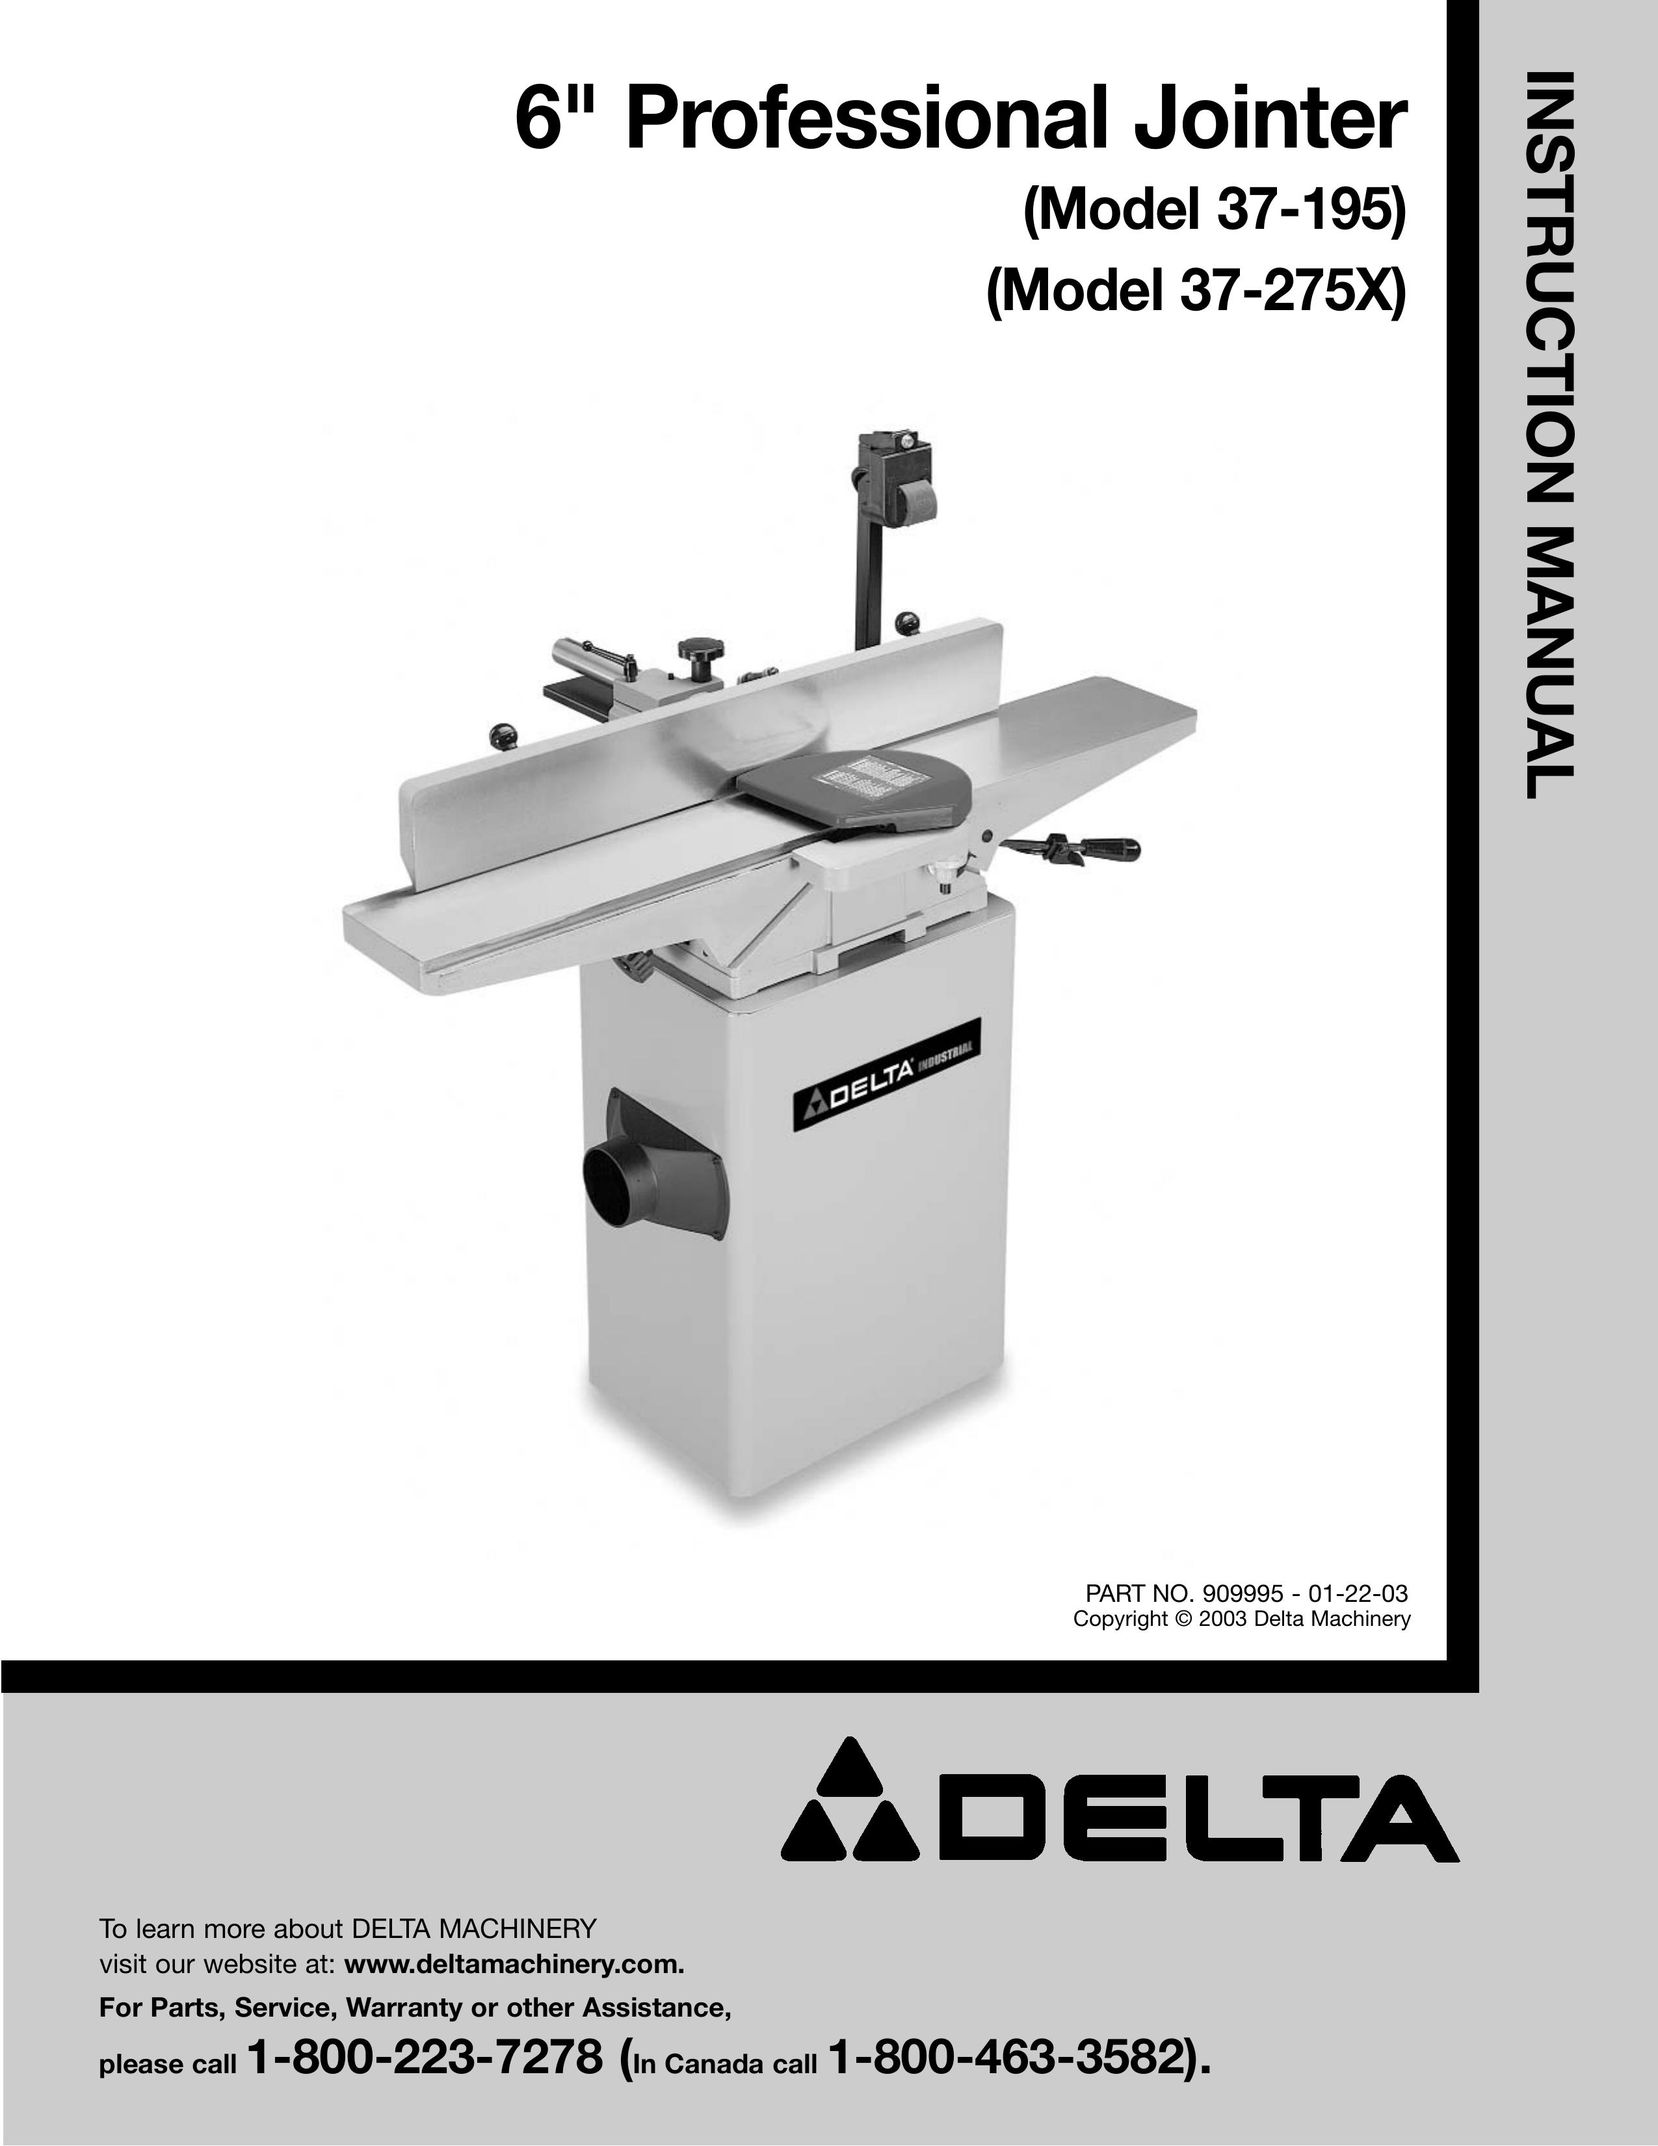 Delta 37-275X Biscuit Joiner User Manual (Page 1)